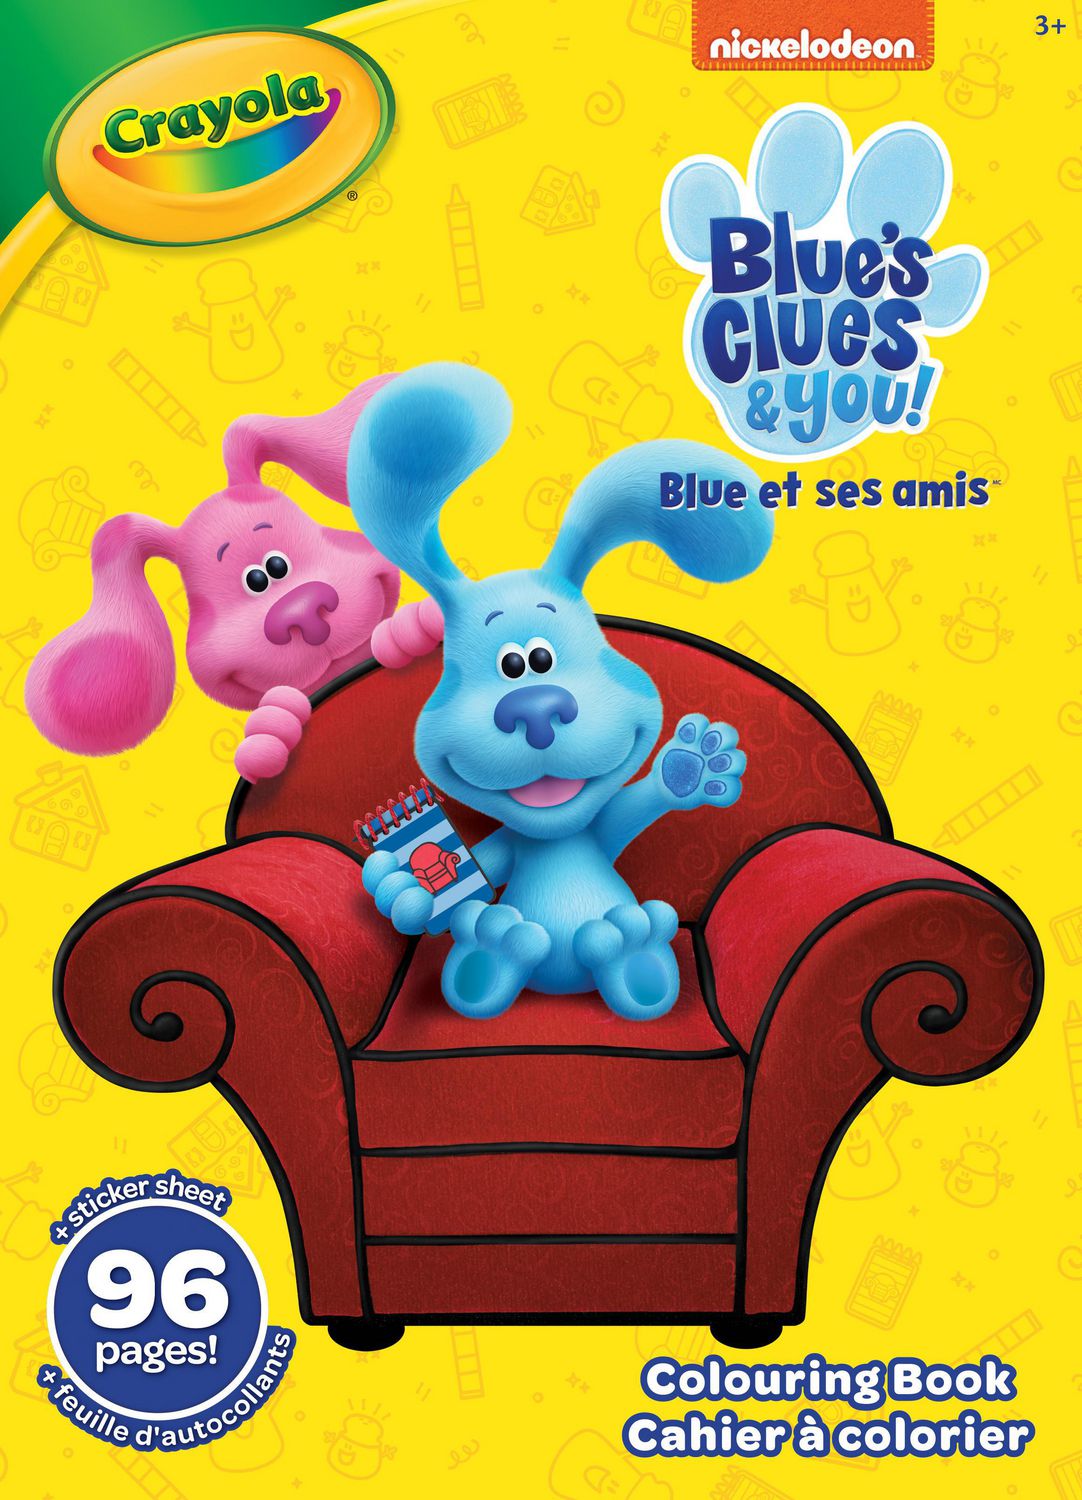 Blue's Clues & You Colouring Book